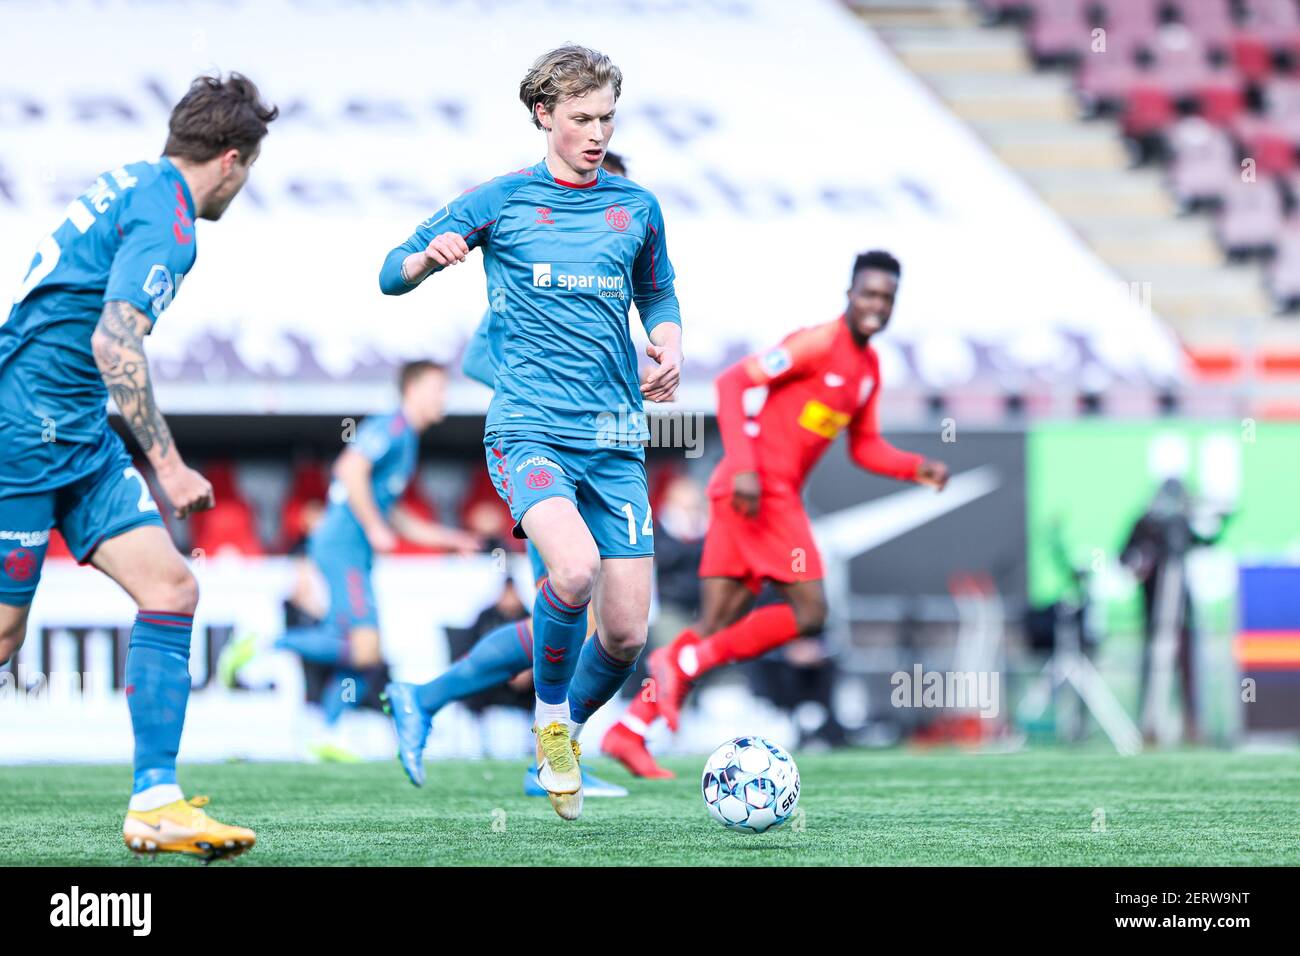 Farum, Denmark. 28th Feb, 2021. Malthe Hoejholt (14) of AaB Fodbold seen in  the 3F Superliga match between FC Nordsjaelland and AaB Fodbold in Right to  Dream Park in Farum, Denmark. (Photo